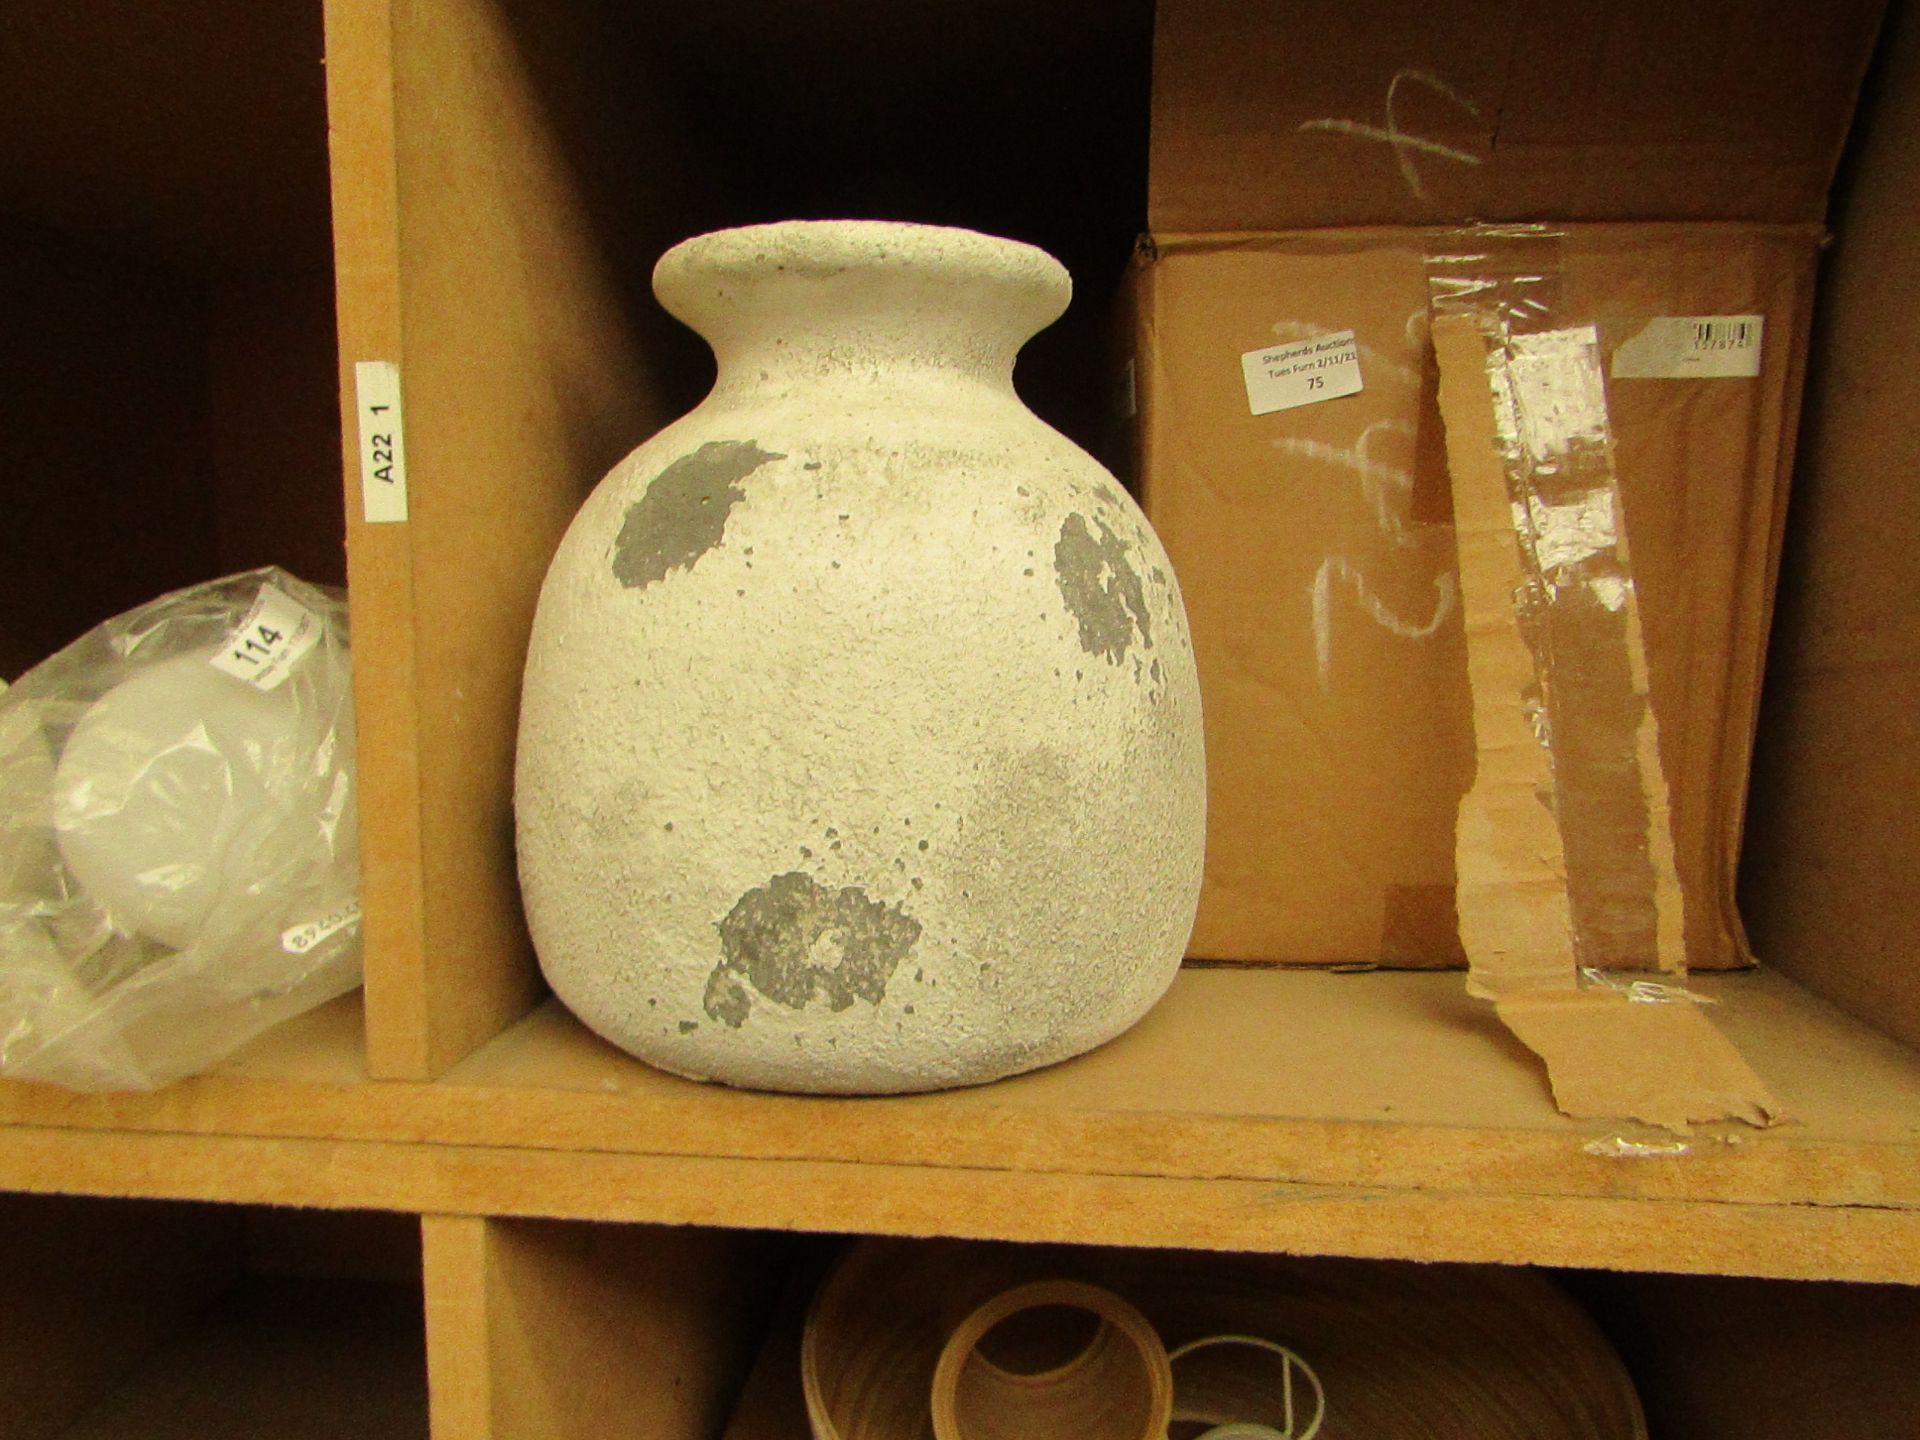 | 1X | COX & COX BOTTLE GREY CEMENT 22X22X24CM VASE | UNCHECKED WITHOUT BOX BUT NO VISIBLE